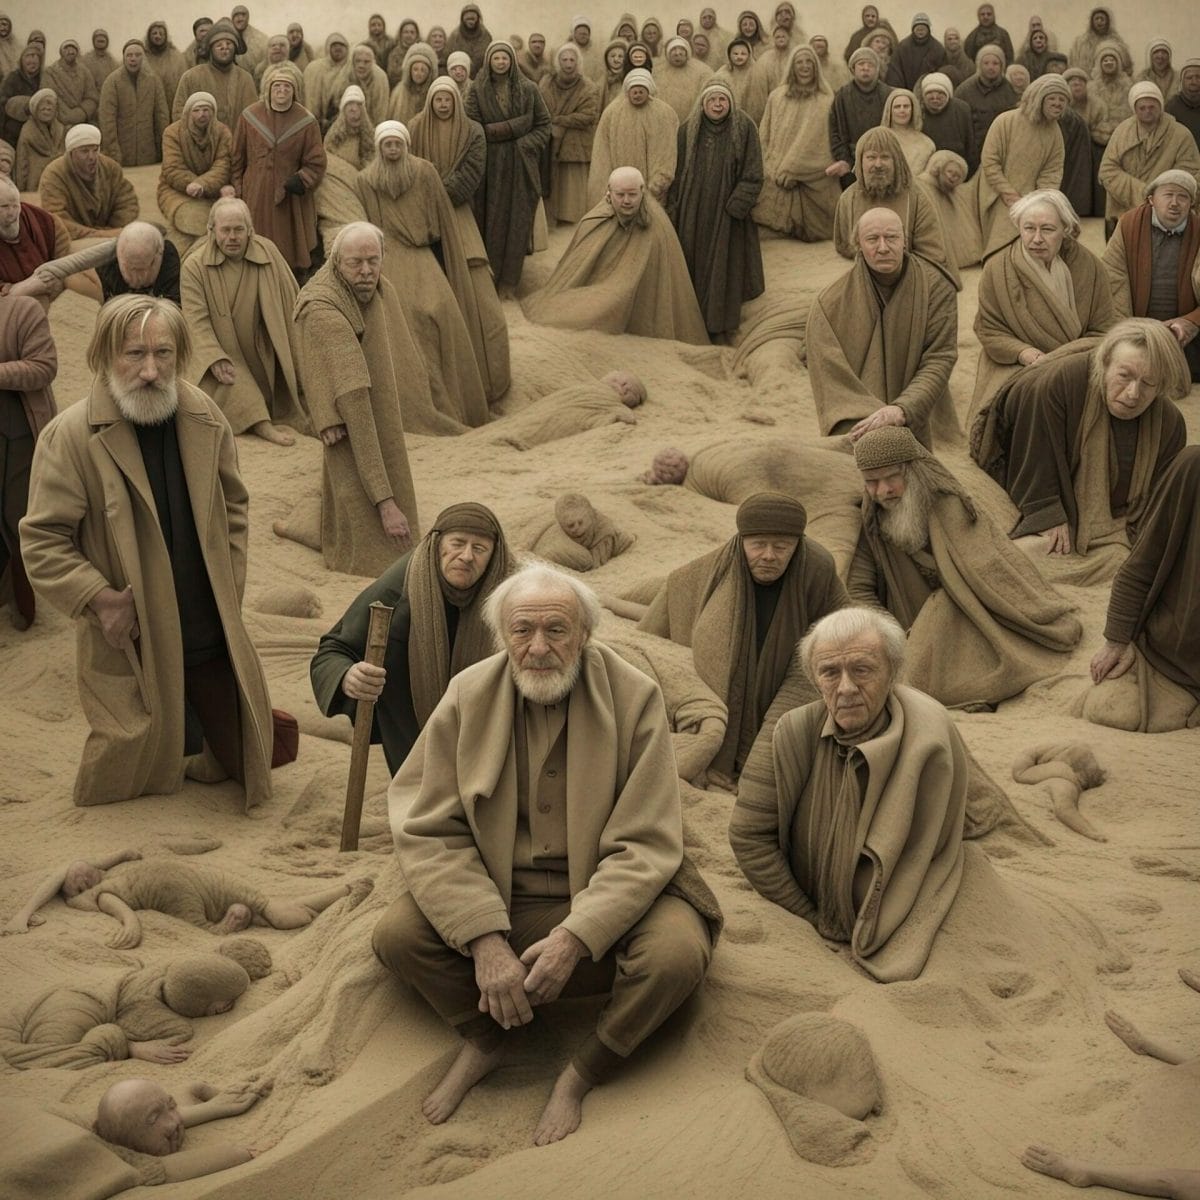 A large group of elderly people sitting in piles of sand.